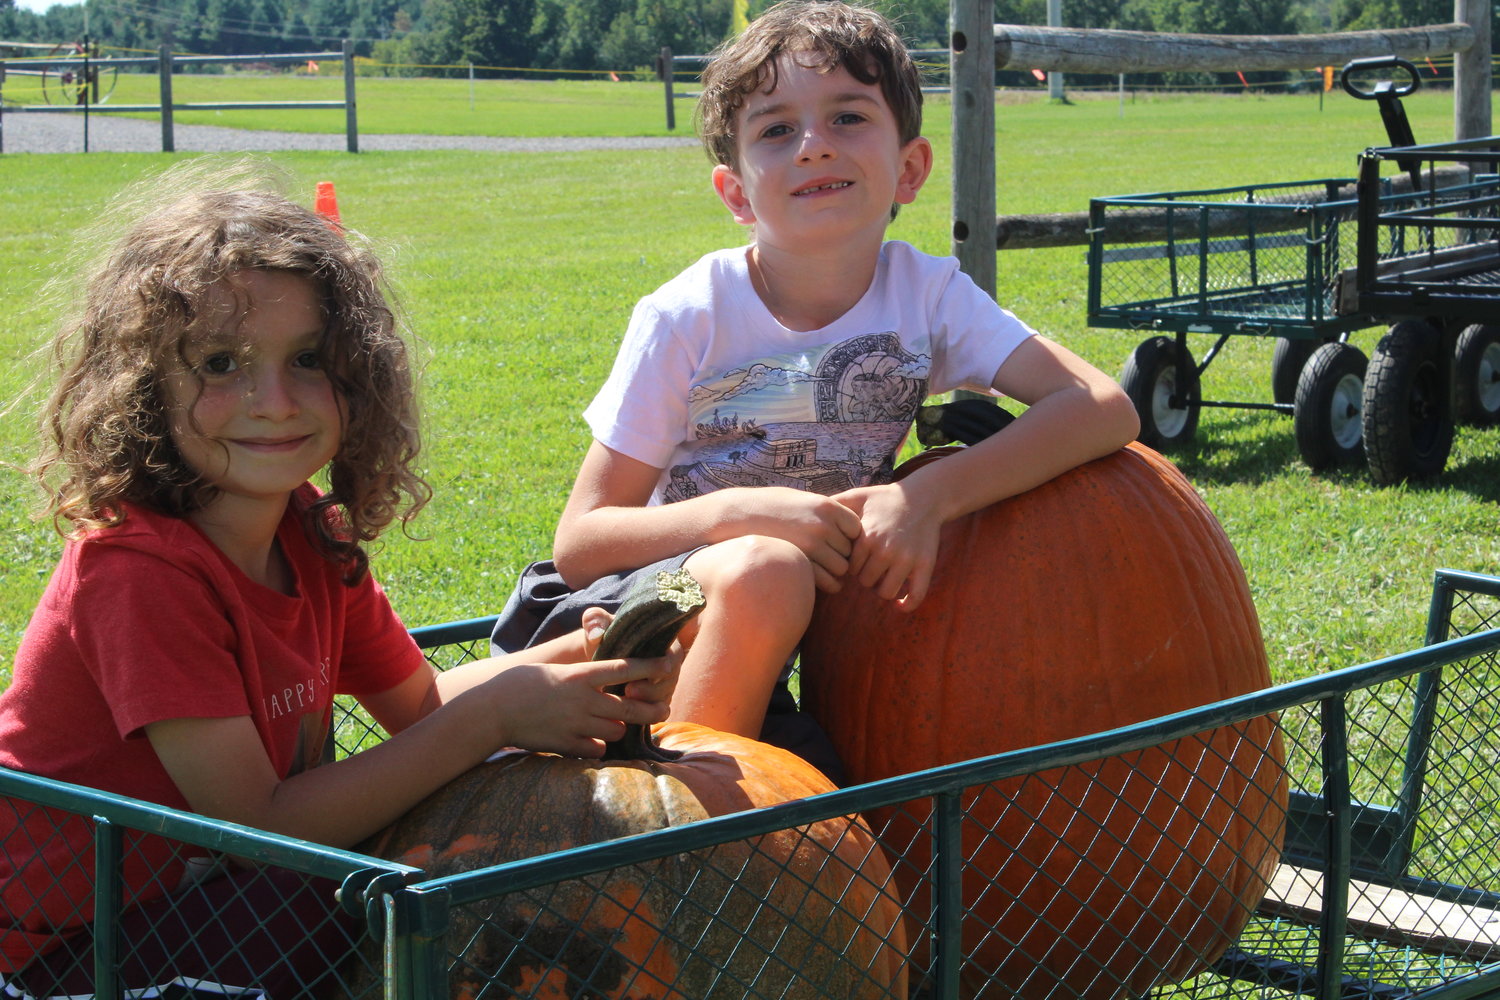 Lincoln, at left, and Emerson Price display the fruits of their labor from the u-pick pumpkin patch.